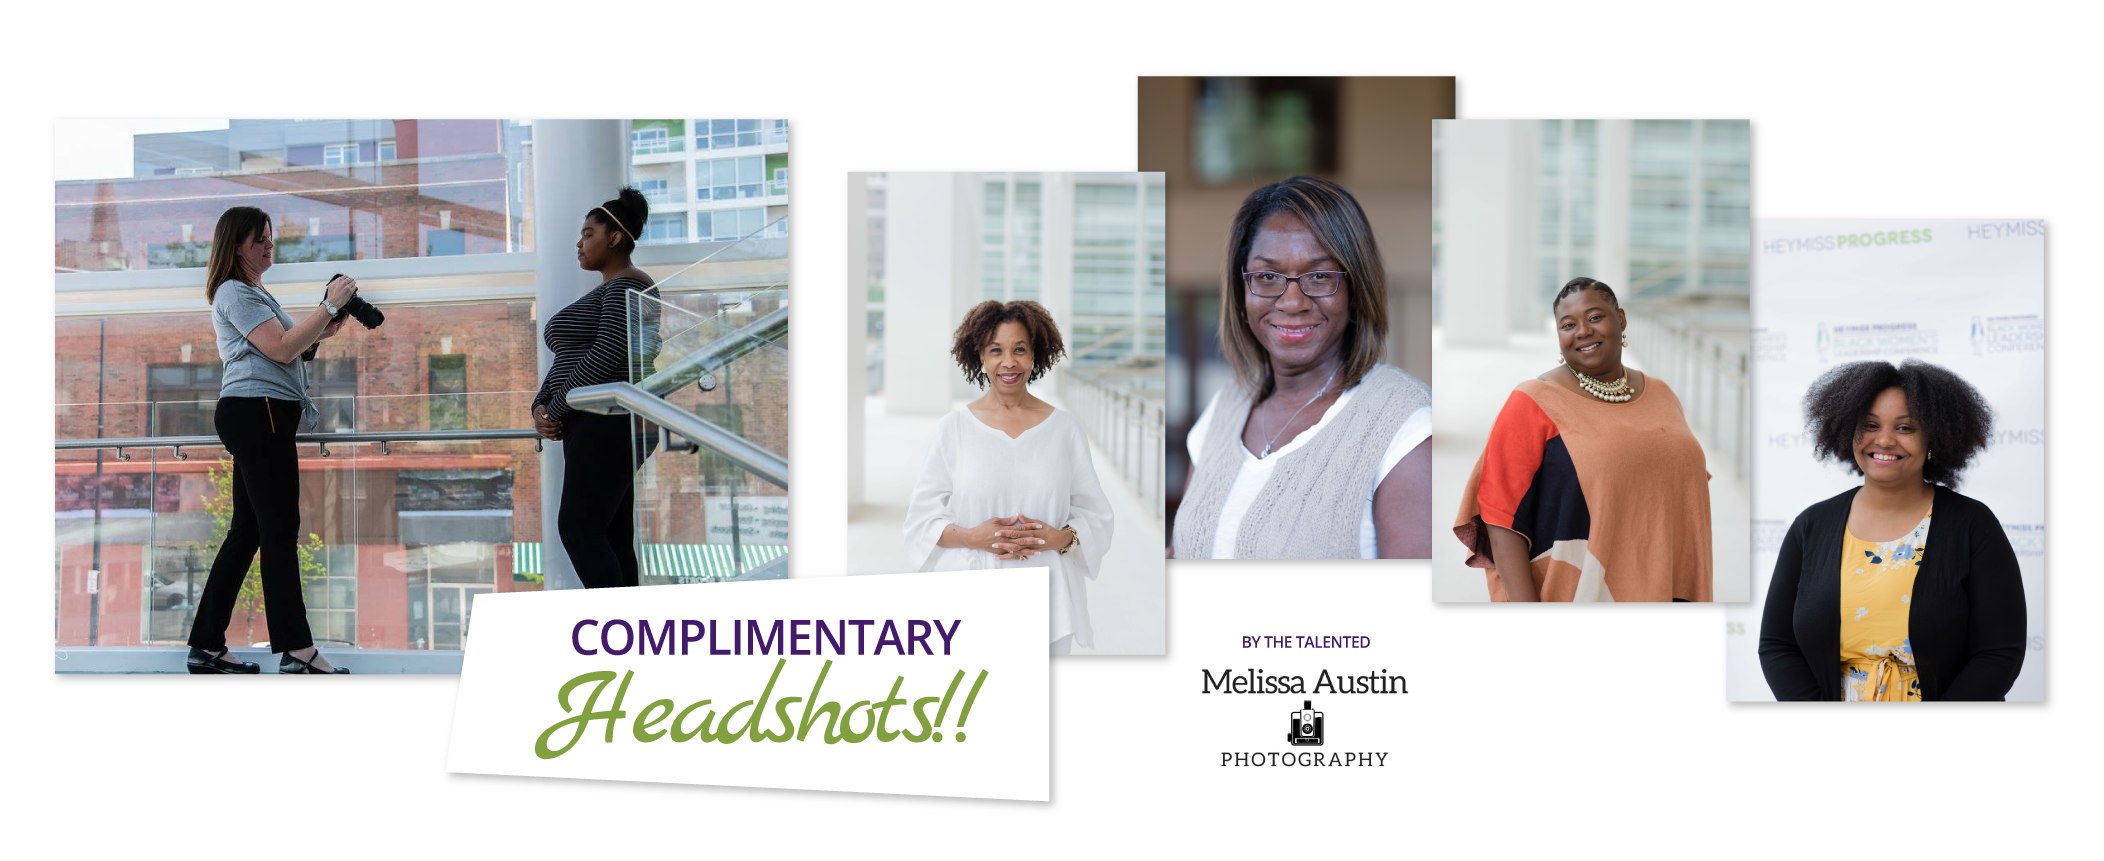 Complimentary headshots at Black Women’s Leadership Conference